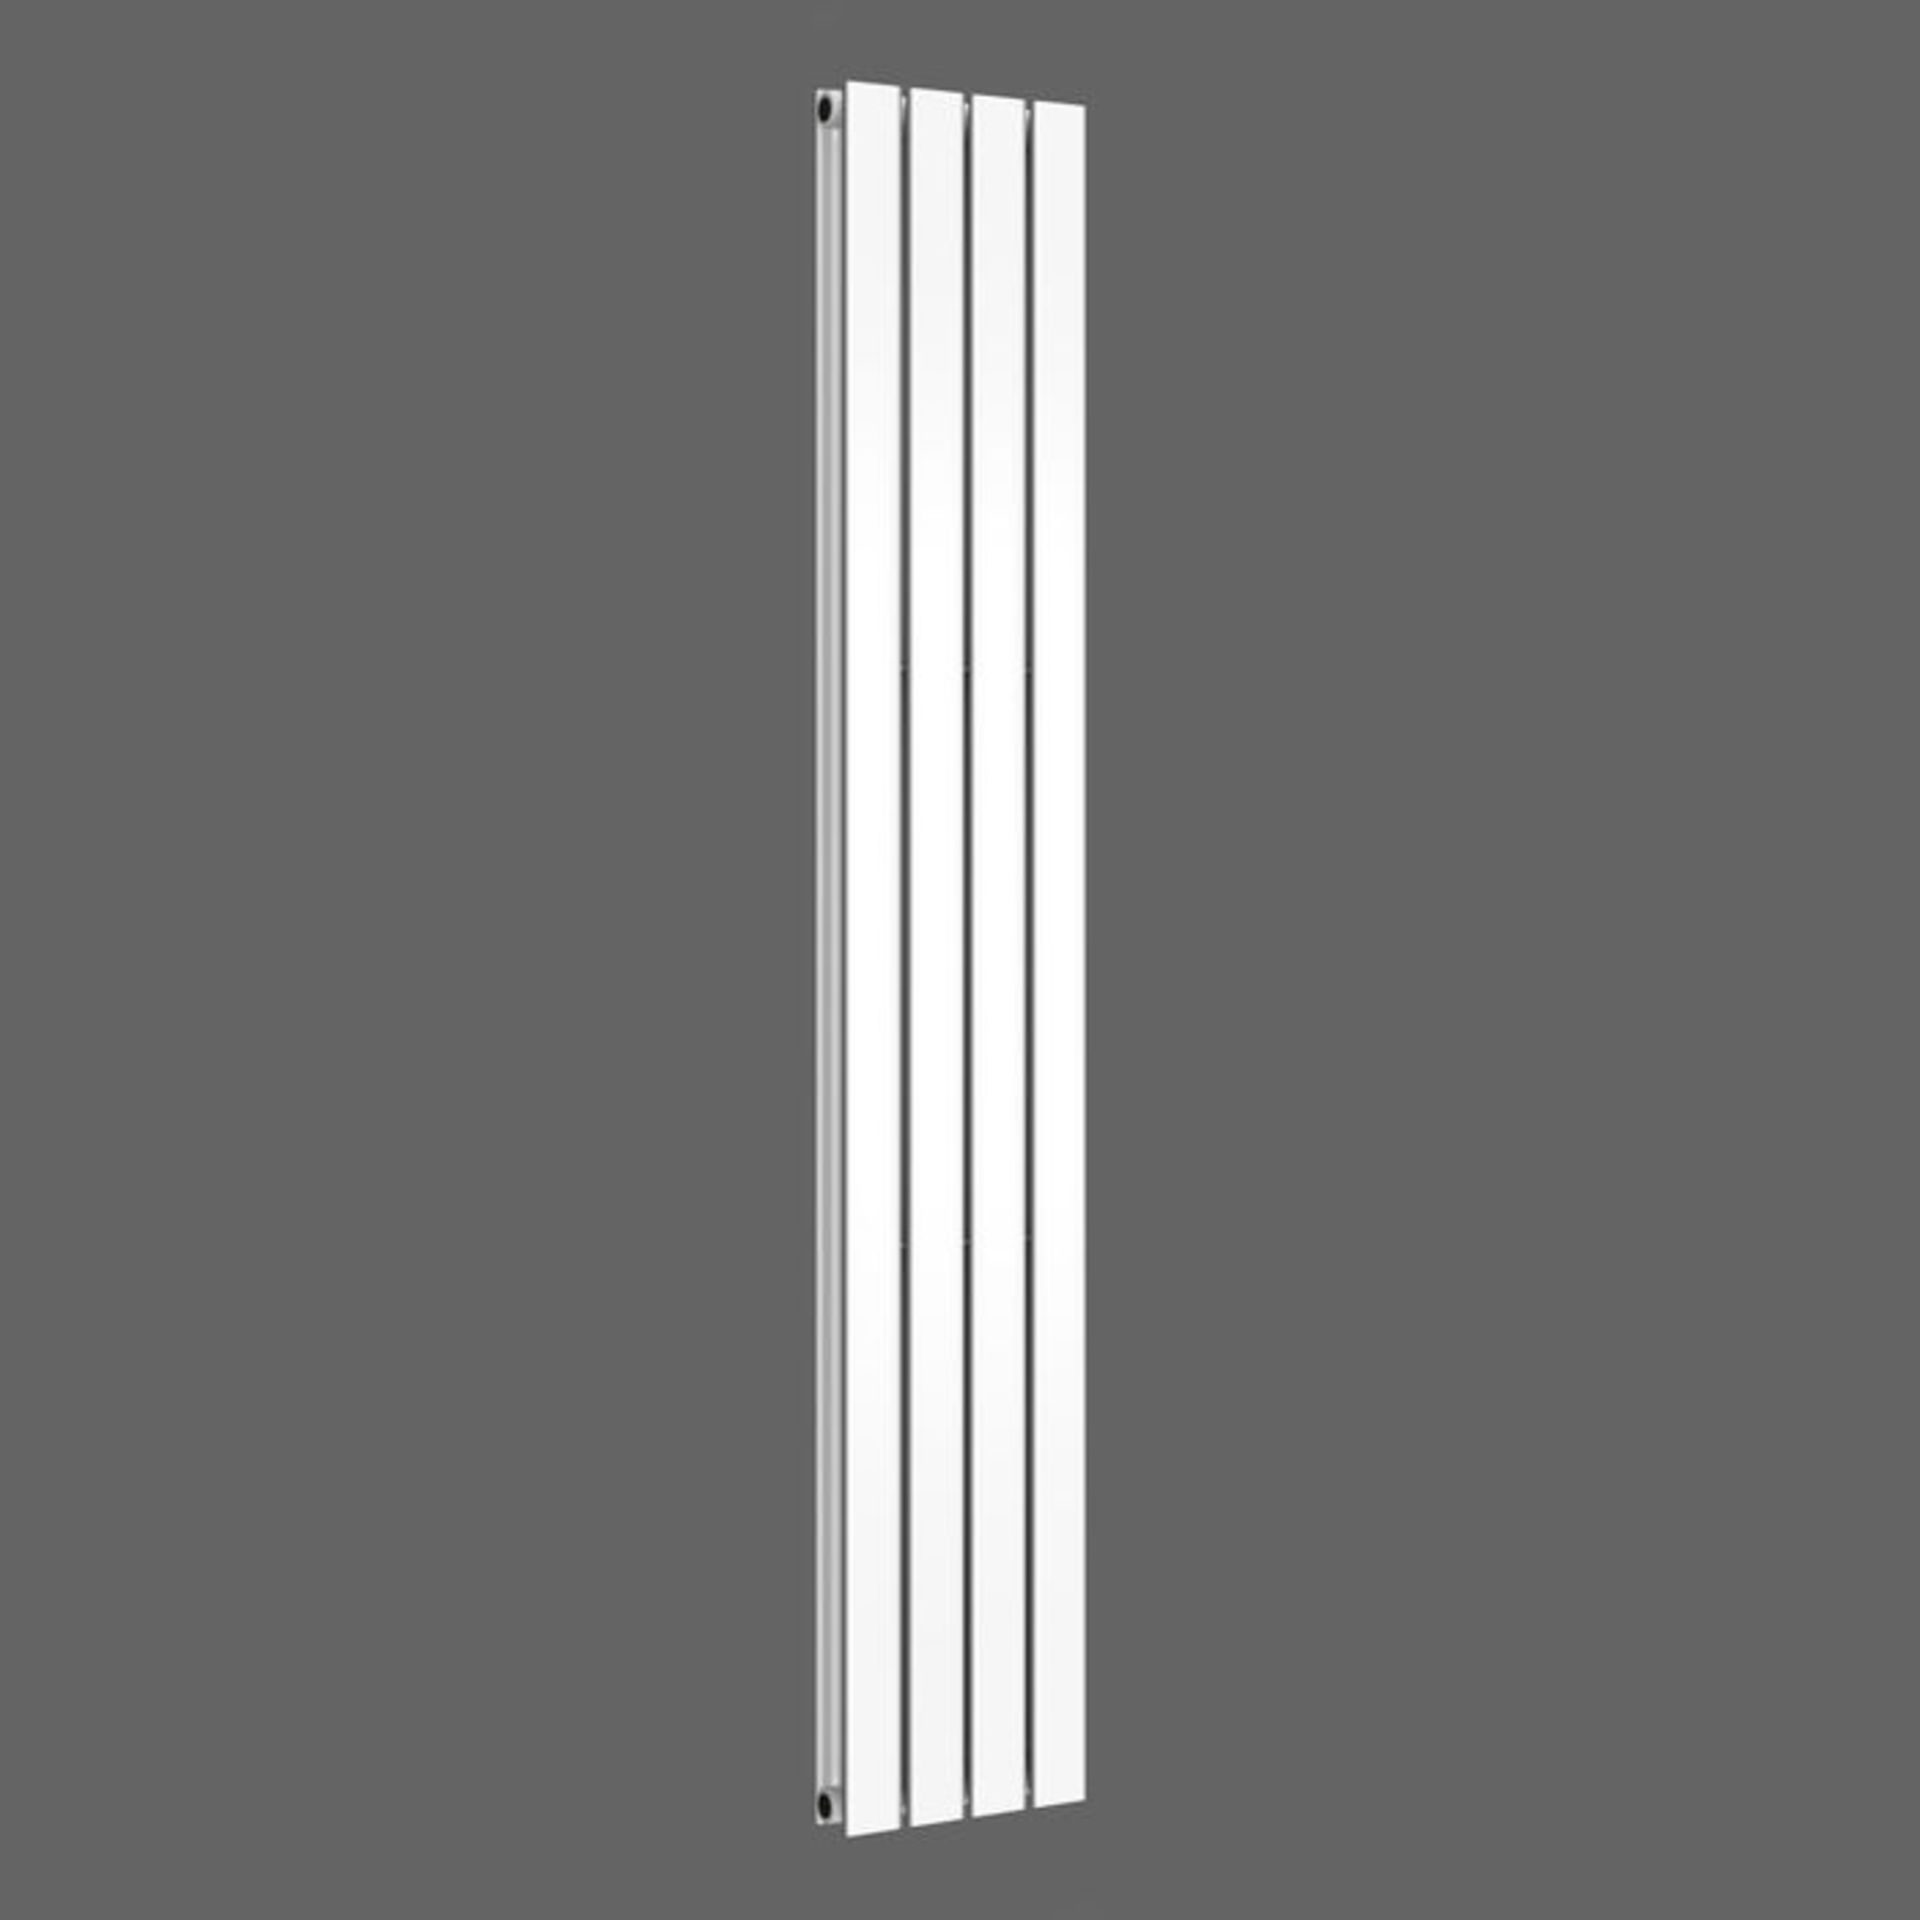 1800x360mm Gloss White Single Flat Panel Vertical Radiator. RRP £276.99. Made with low carbon ... - Image 2 of 2